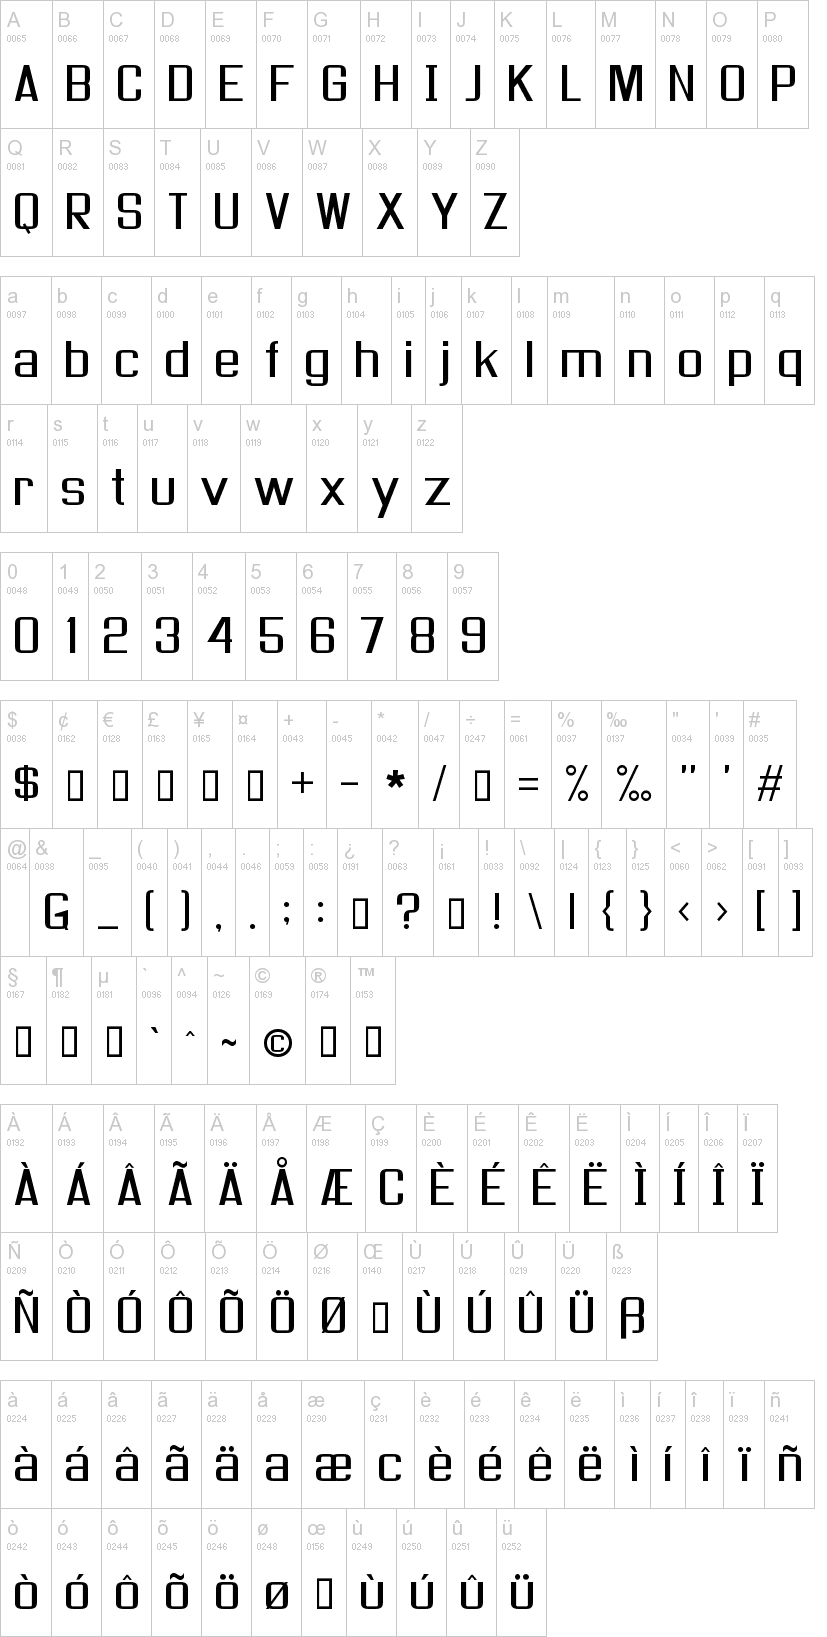 Showing Font